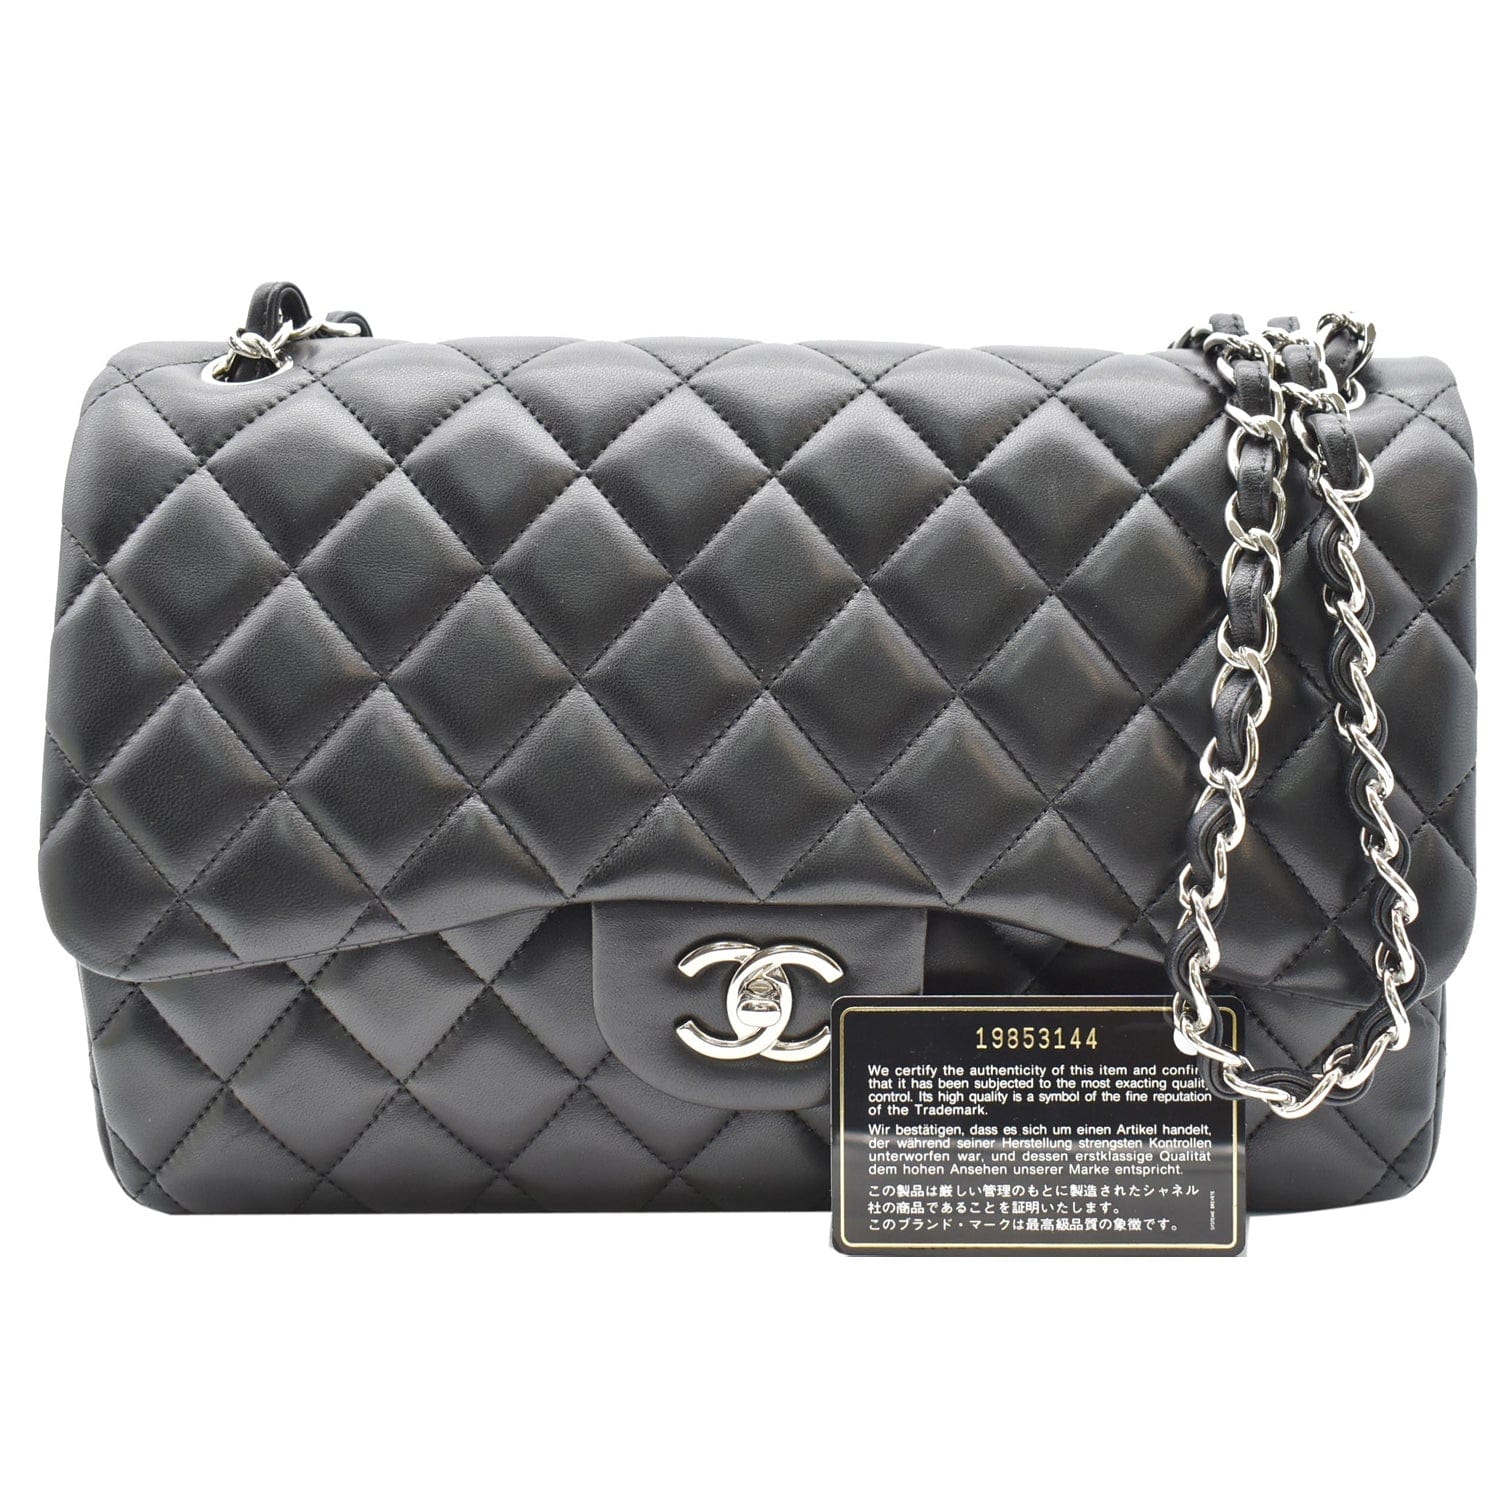 Chanel 19 Large Flap Quilted Lambskin Leather Shoulder Bag